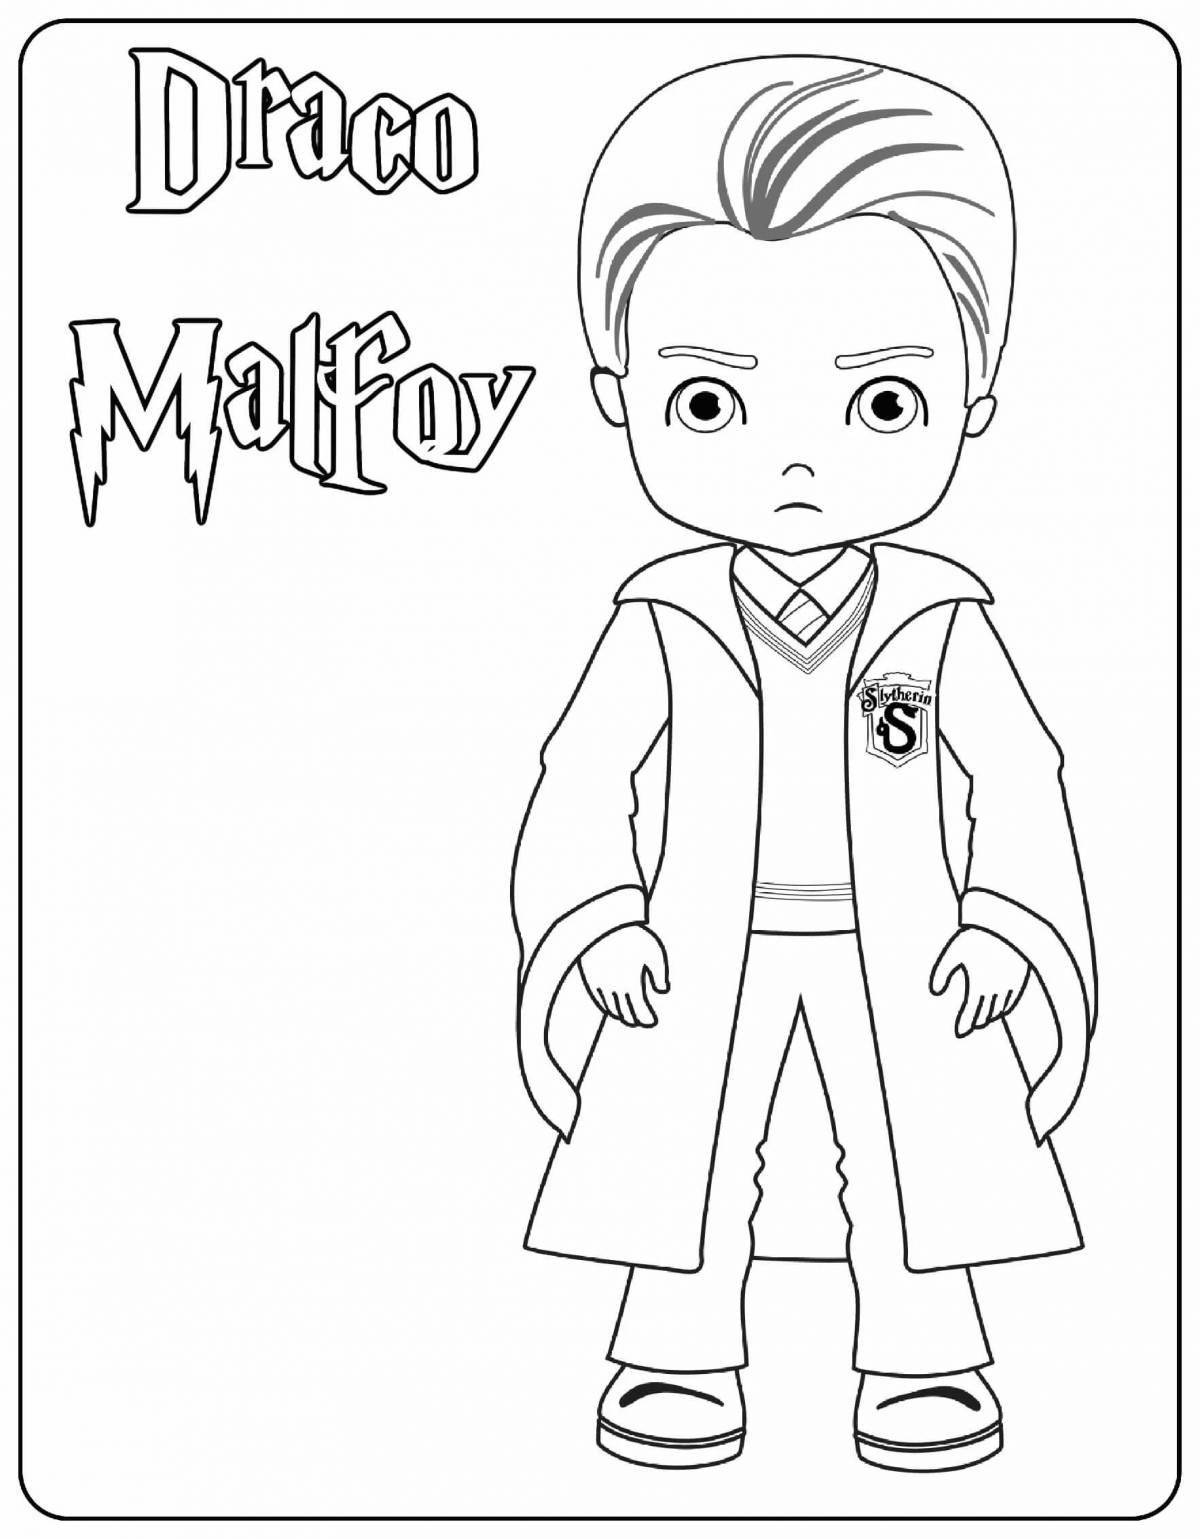 Draco Malfoy's glowing spiral coloring book